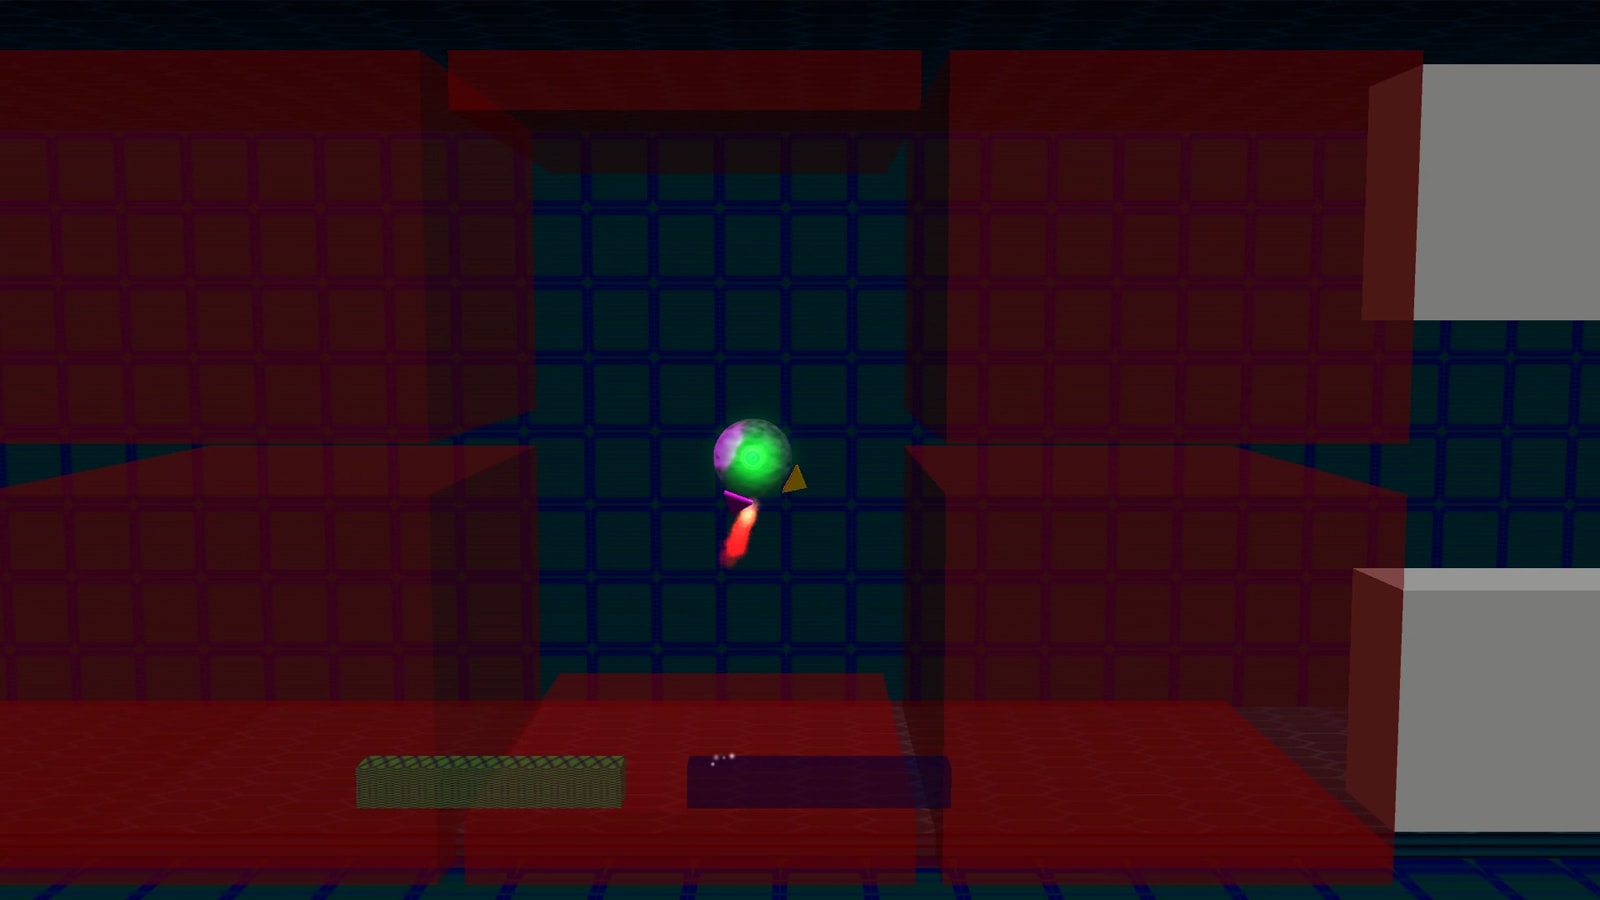 An orb jumps in a gap between red transparent cubes. 